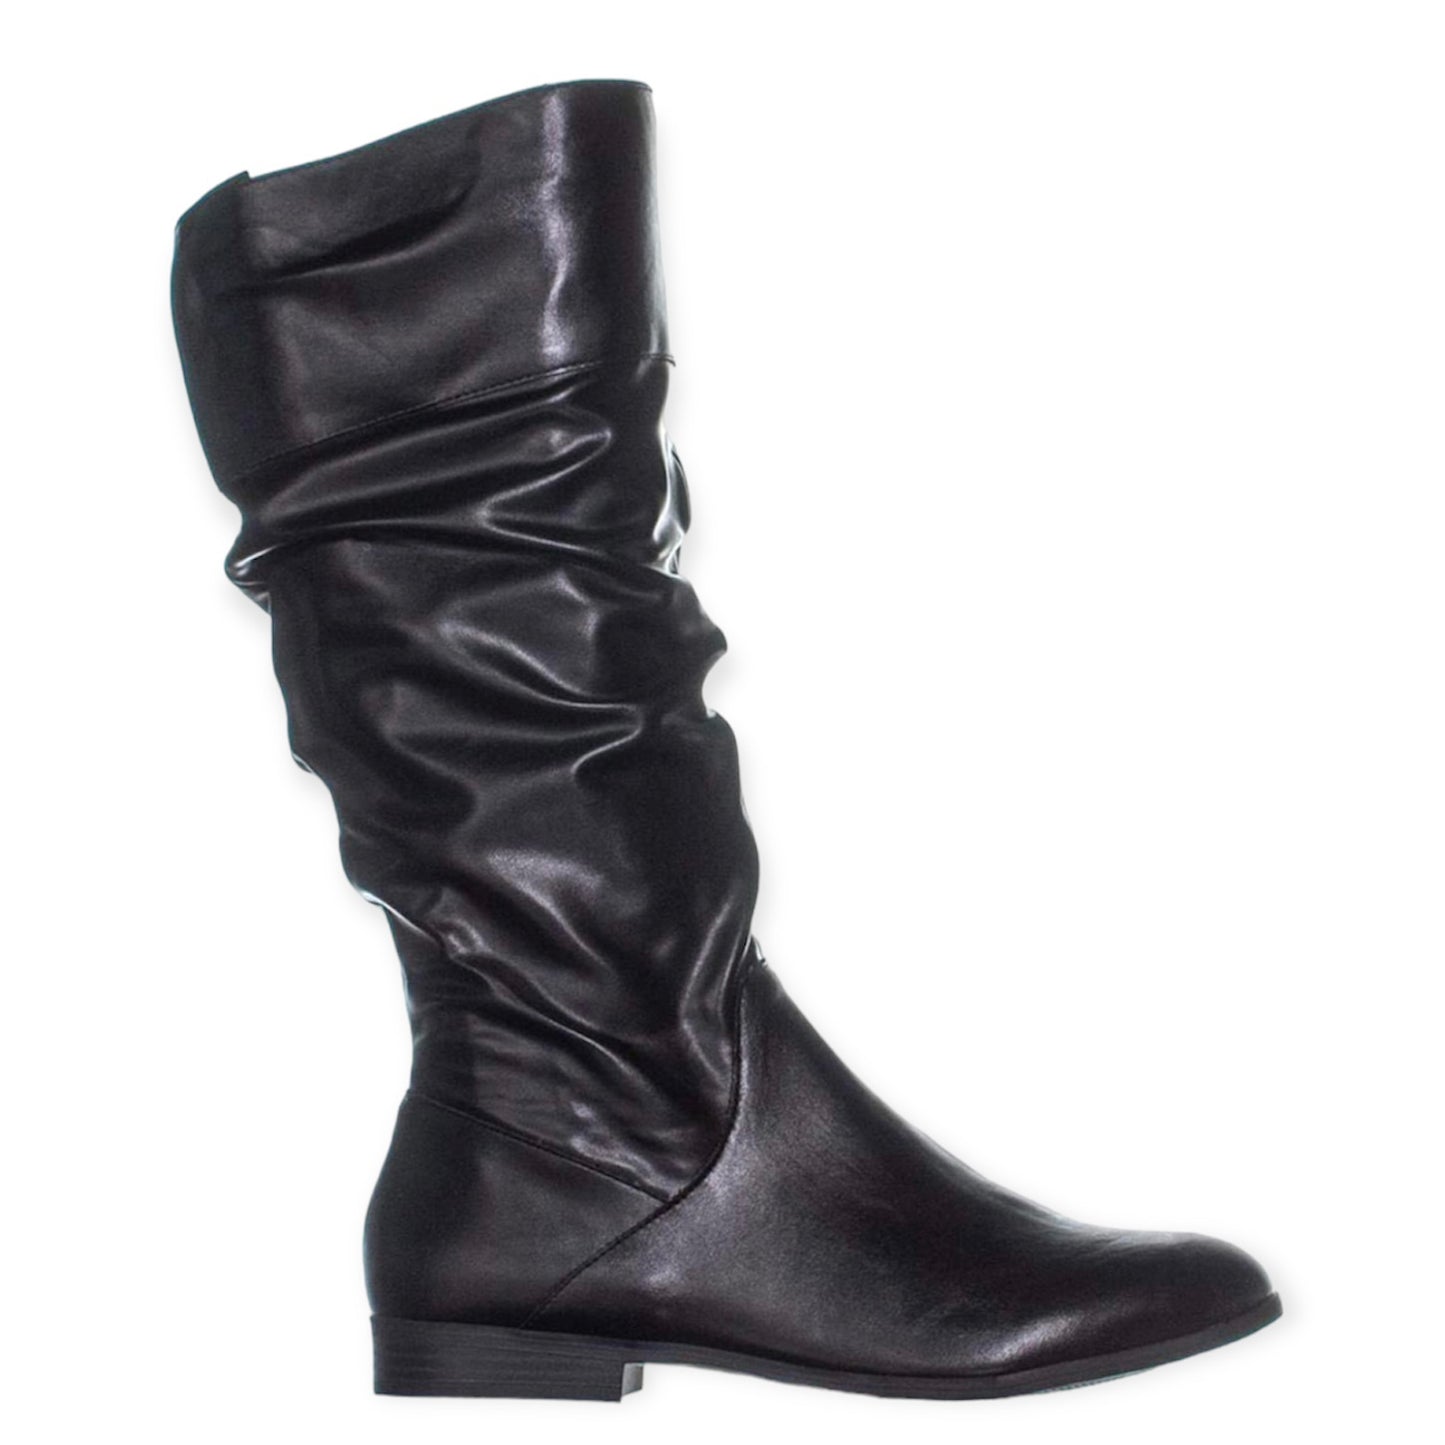 KELIMAEP Black Ruched Round Toe Zip Up Women's Riding Boots